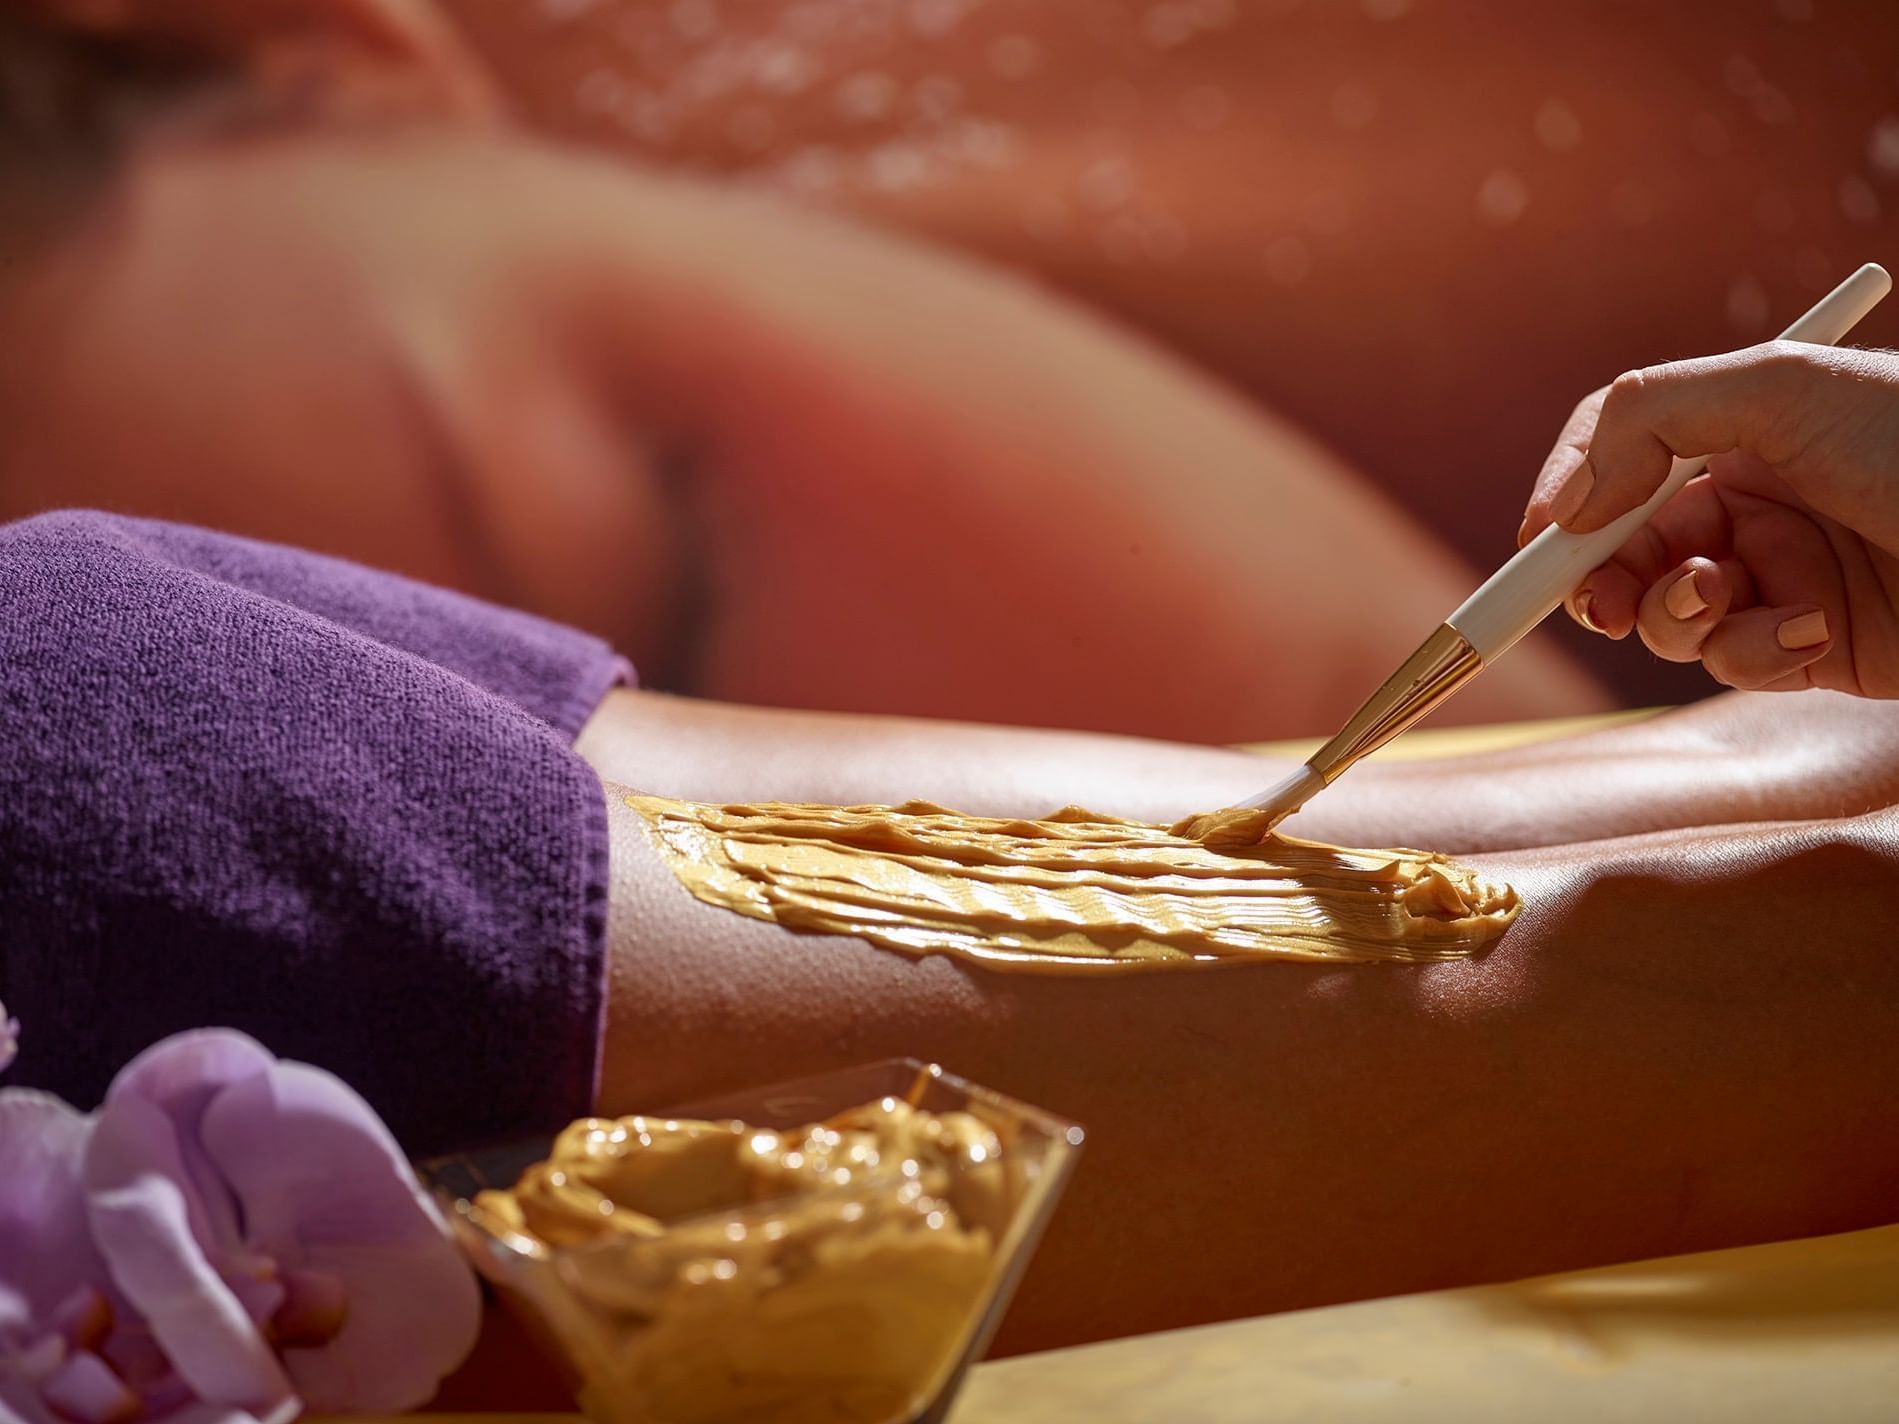 Applying therapeutic substance on skin at Ana Hotels Europa